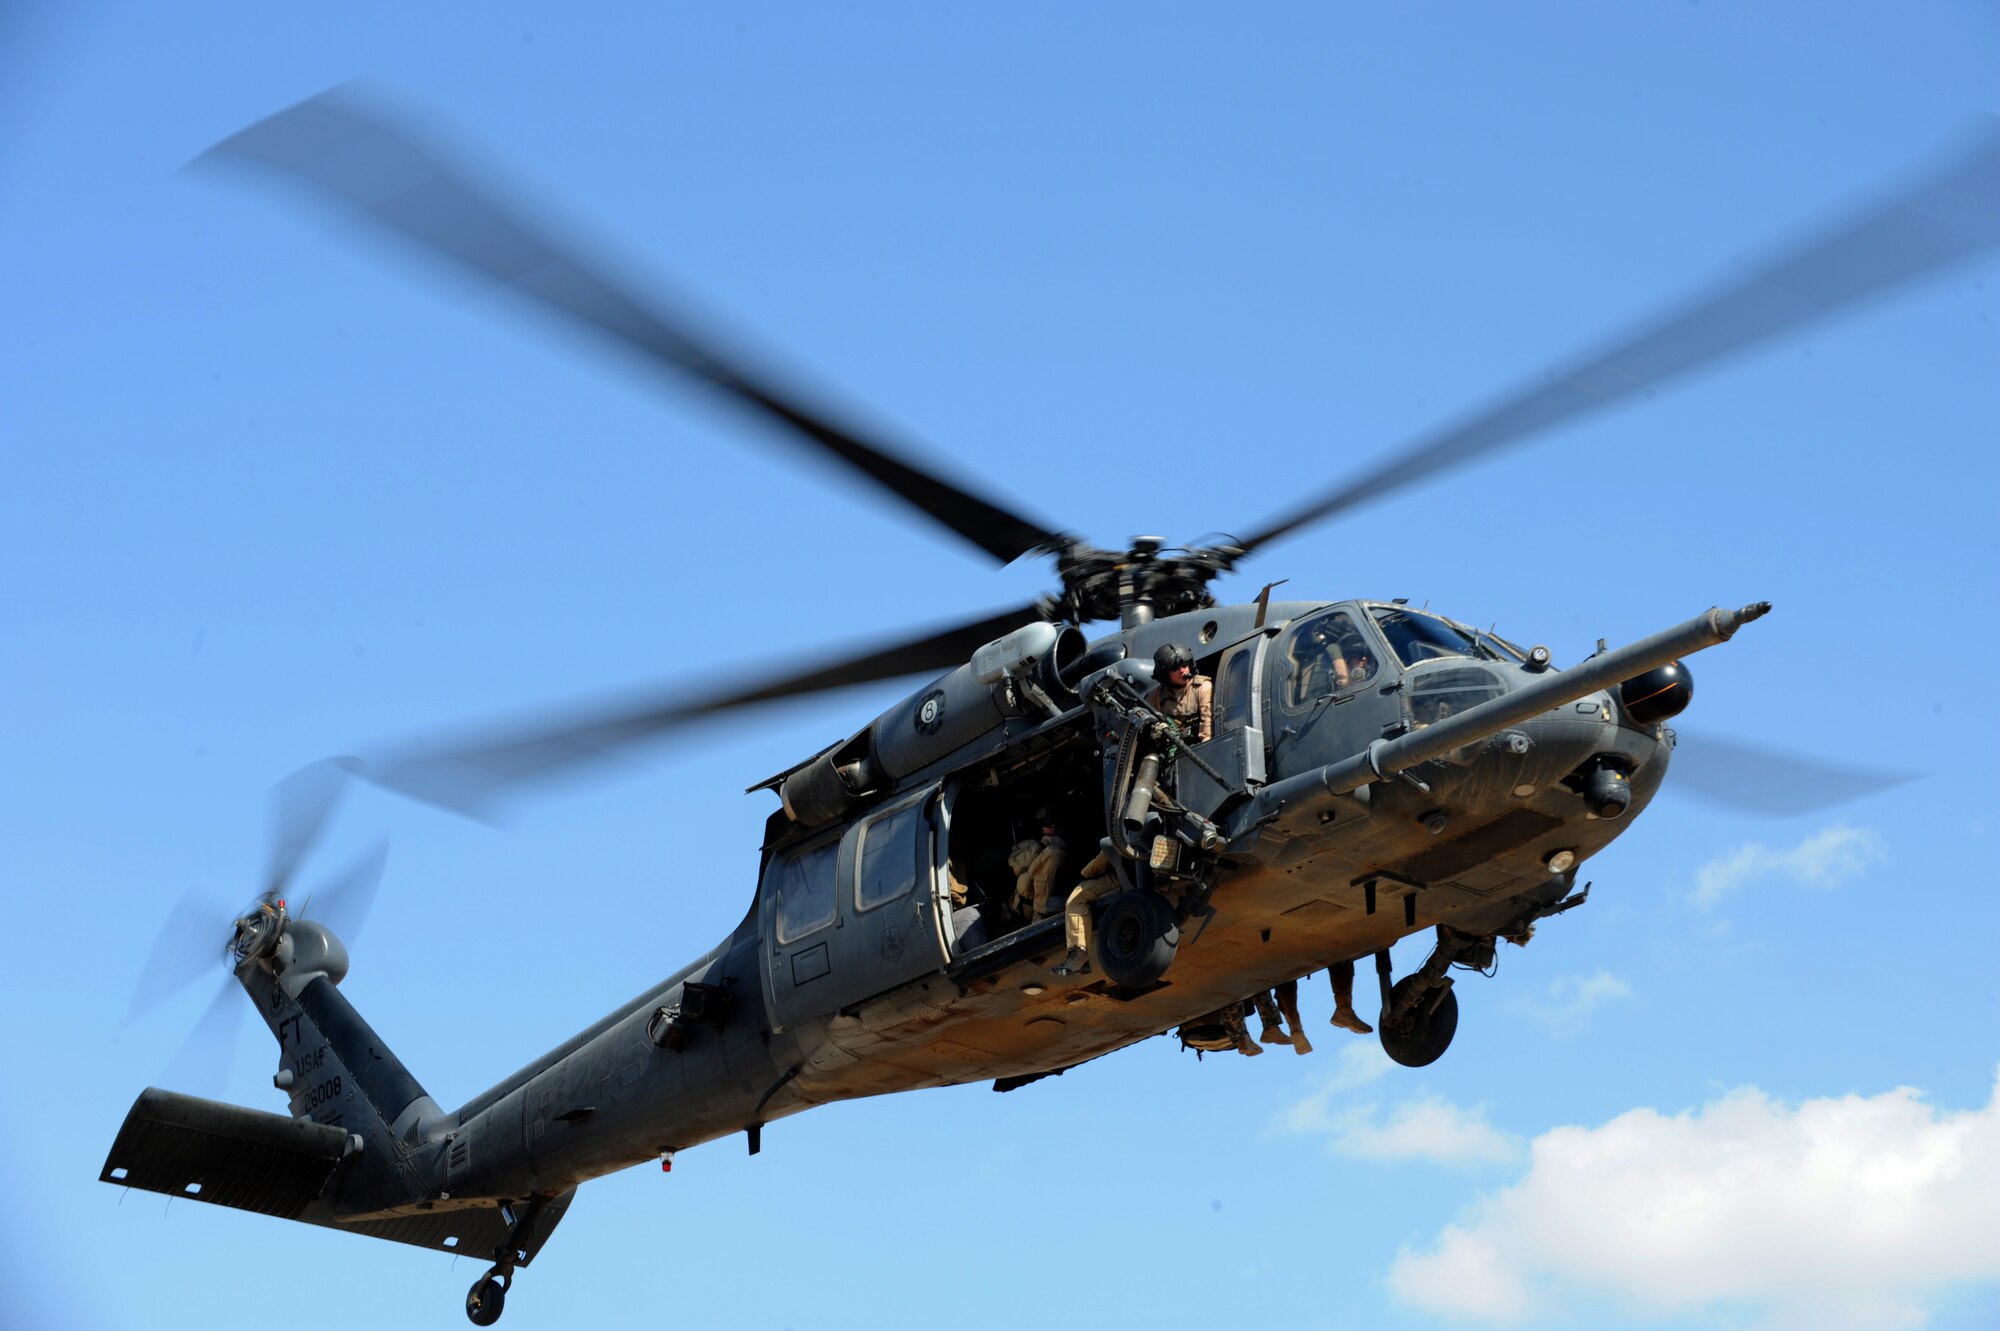 A U.S. Air Force HH-60 Pavehawk from the 64th Expeditionary Rescue Squadron, Joint Base Balad, Iraq, comes in for a landing during a proficiency exercise April 10, 2009, in support of Operation Iraqi Freedom.  (U.S. Air Force photo by Staff Sgt. James L. Harper Jr.)